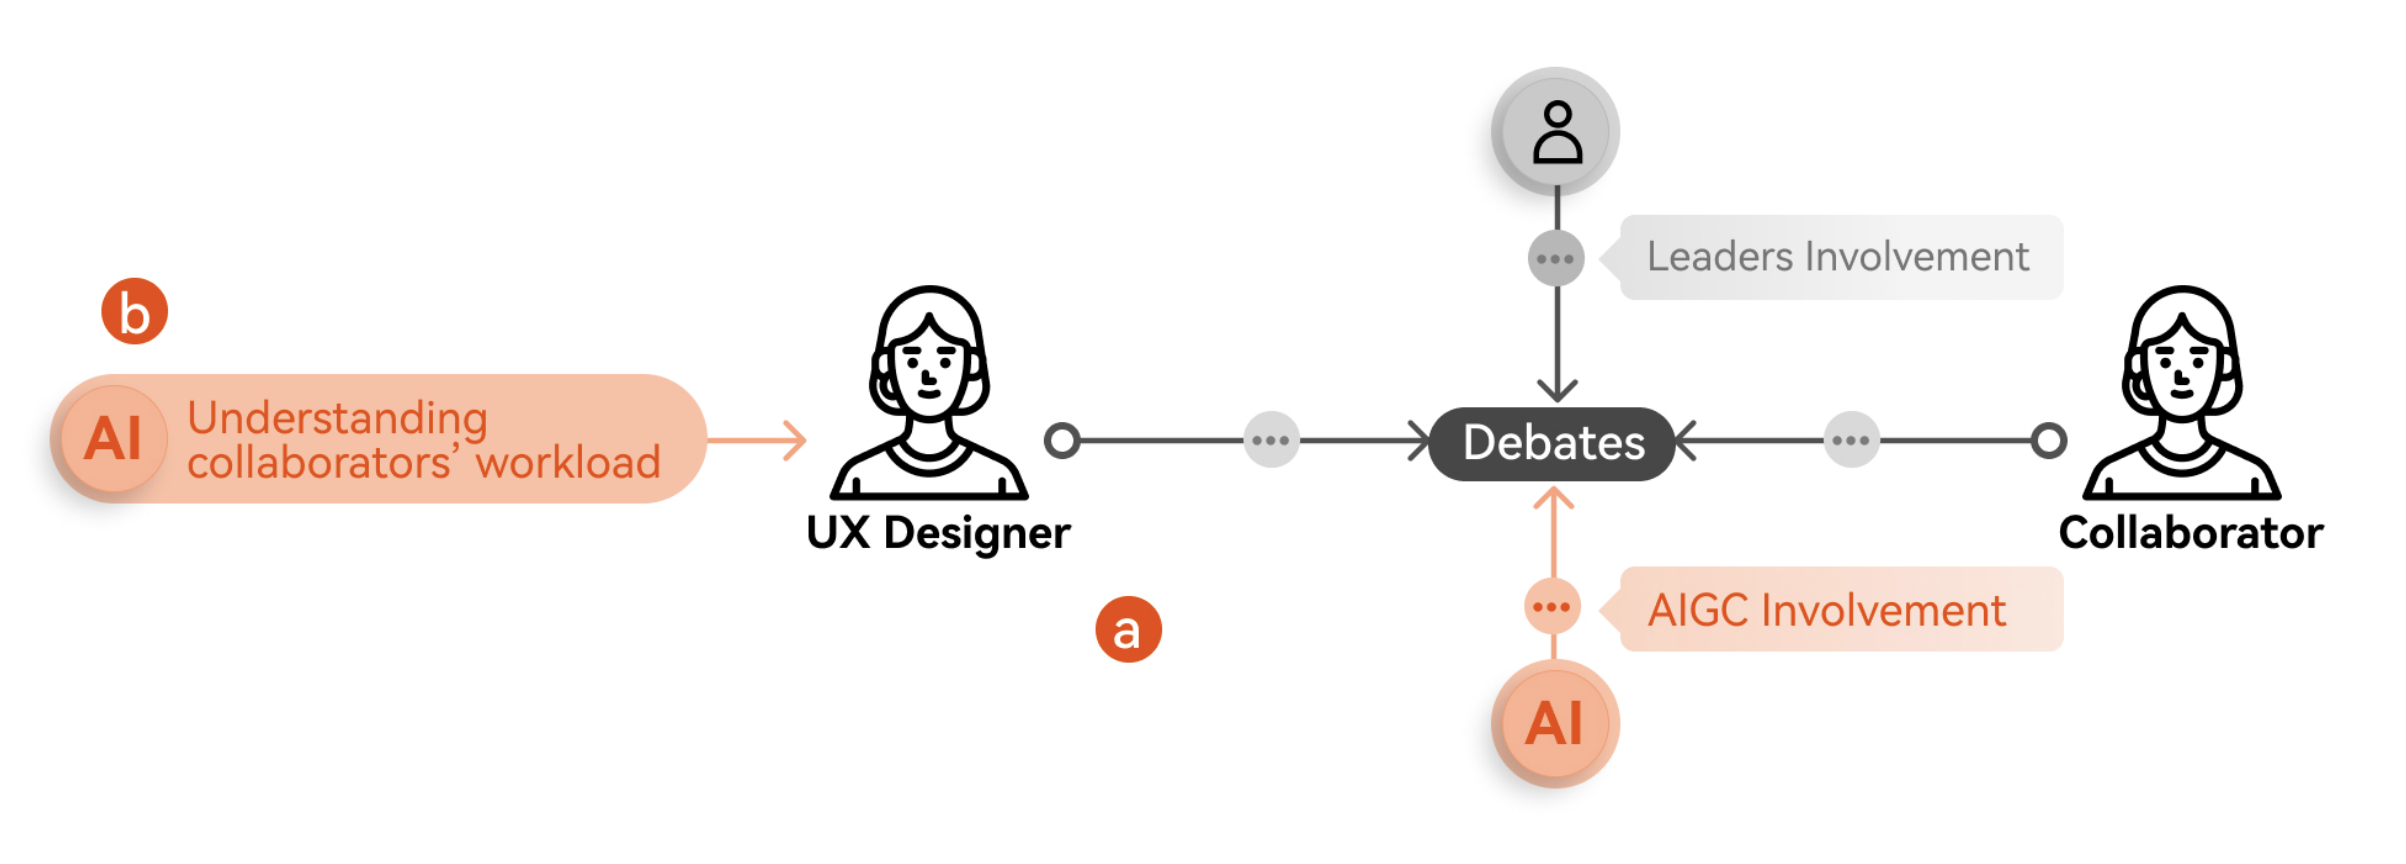 The process of how AIGC tools mediate debates, where UX designers leverage AIGC tools to gain insights into collaborators' workloads